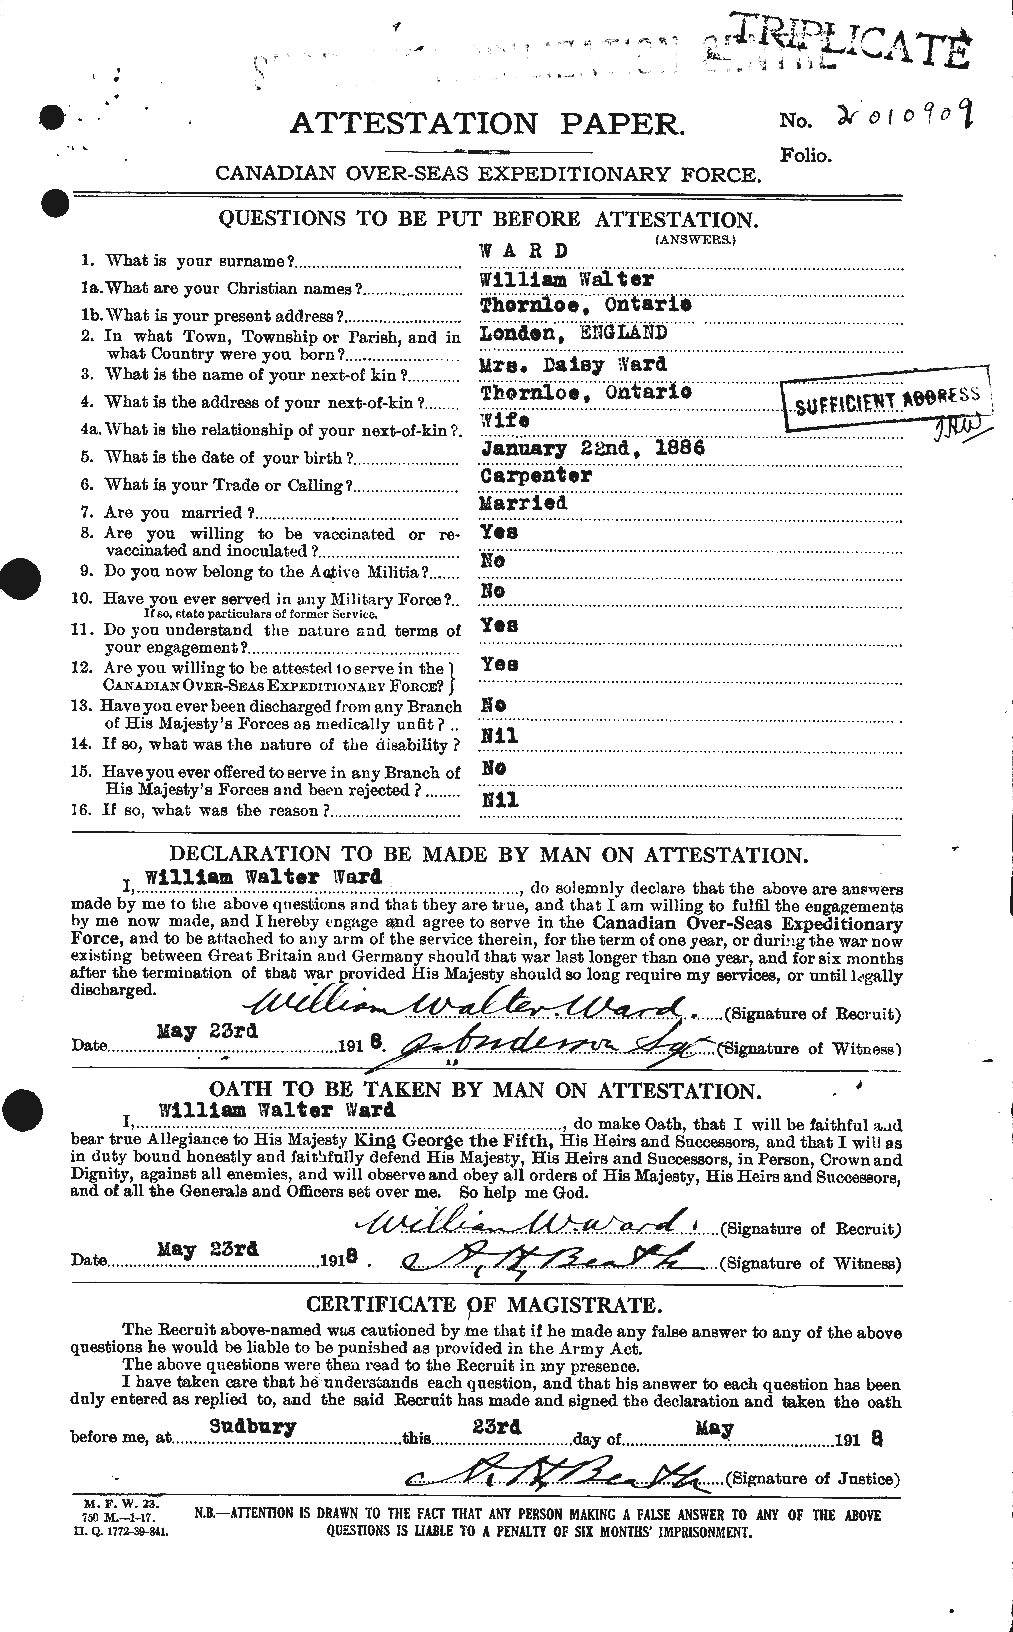 Personnel Records of the First World War - CEF 659848a